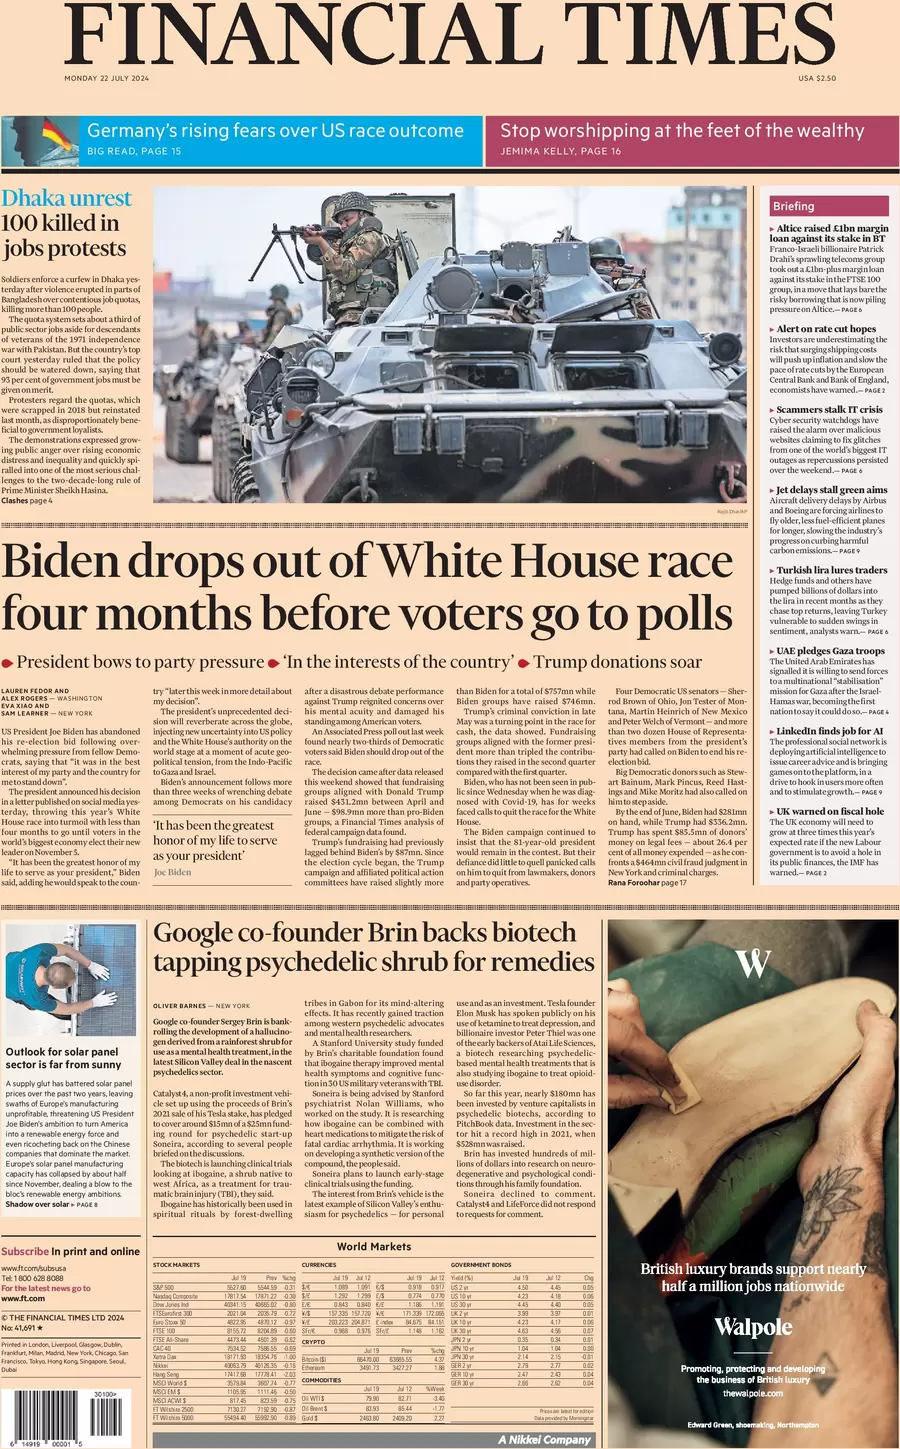 Financial Times - Biden pulls out of White House race and endorses Harris as his successor 
